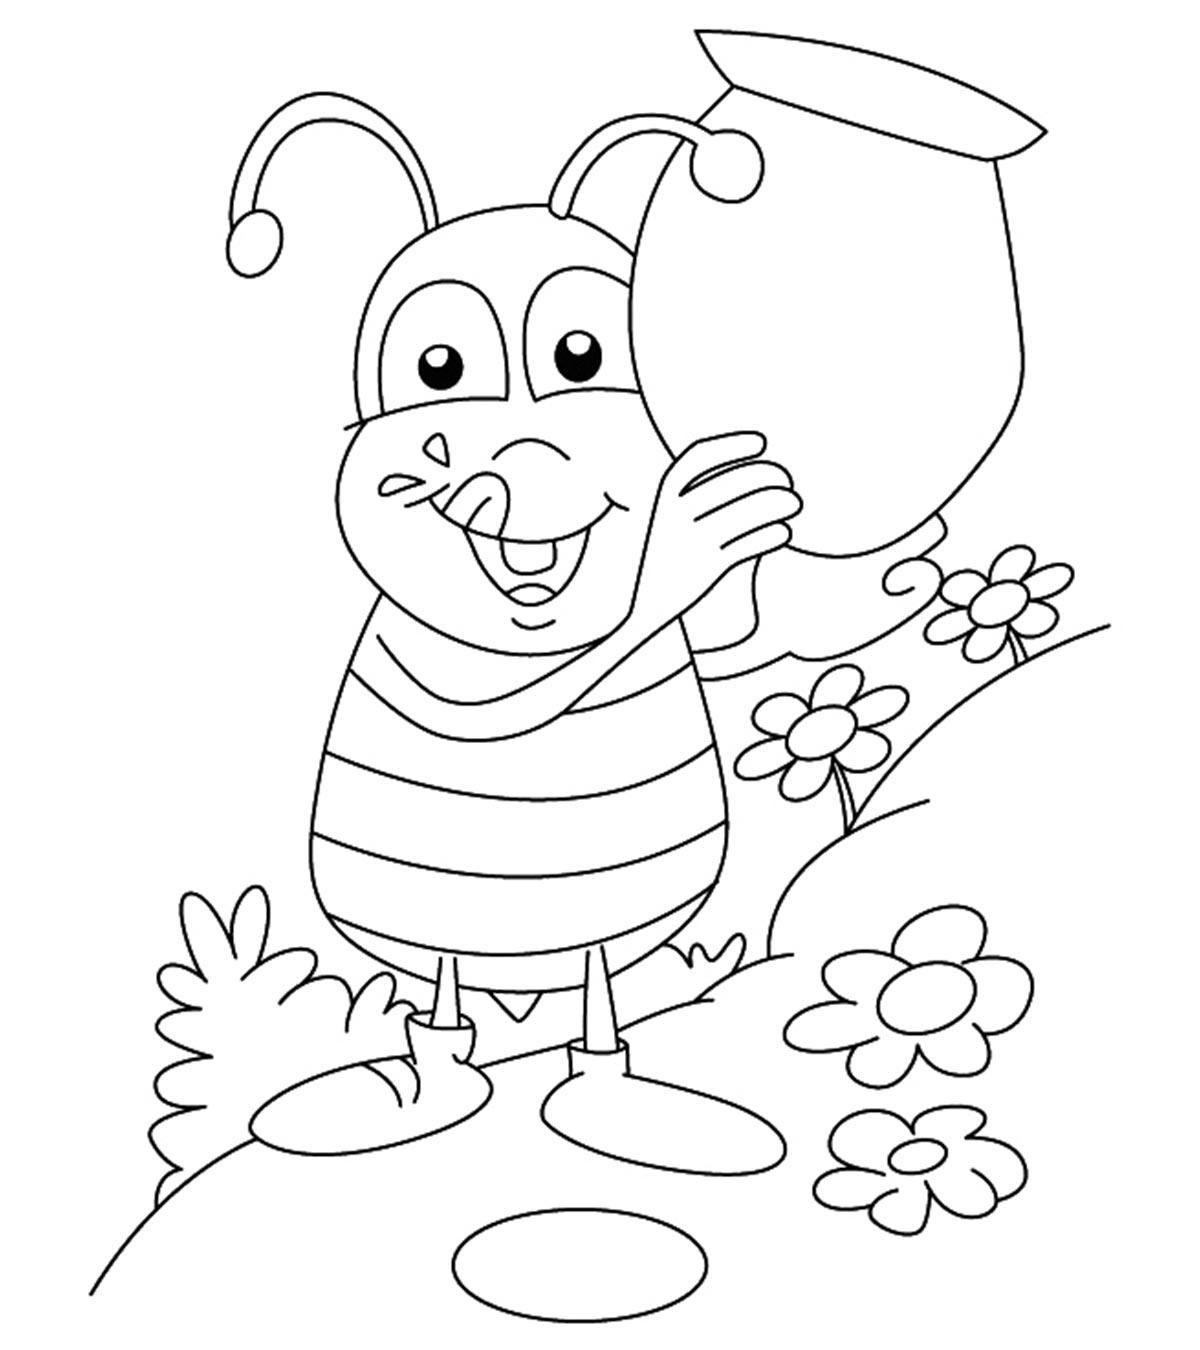 Top 17 Bug Coloring Pages Your Little Ones will Love To Color